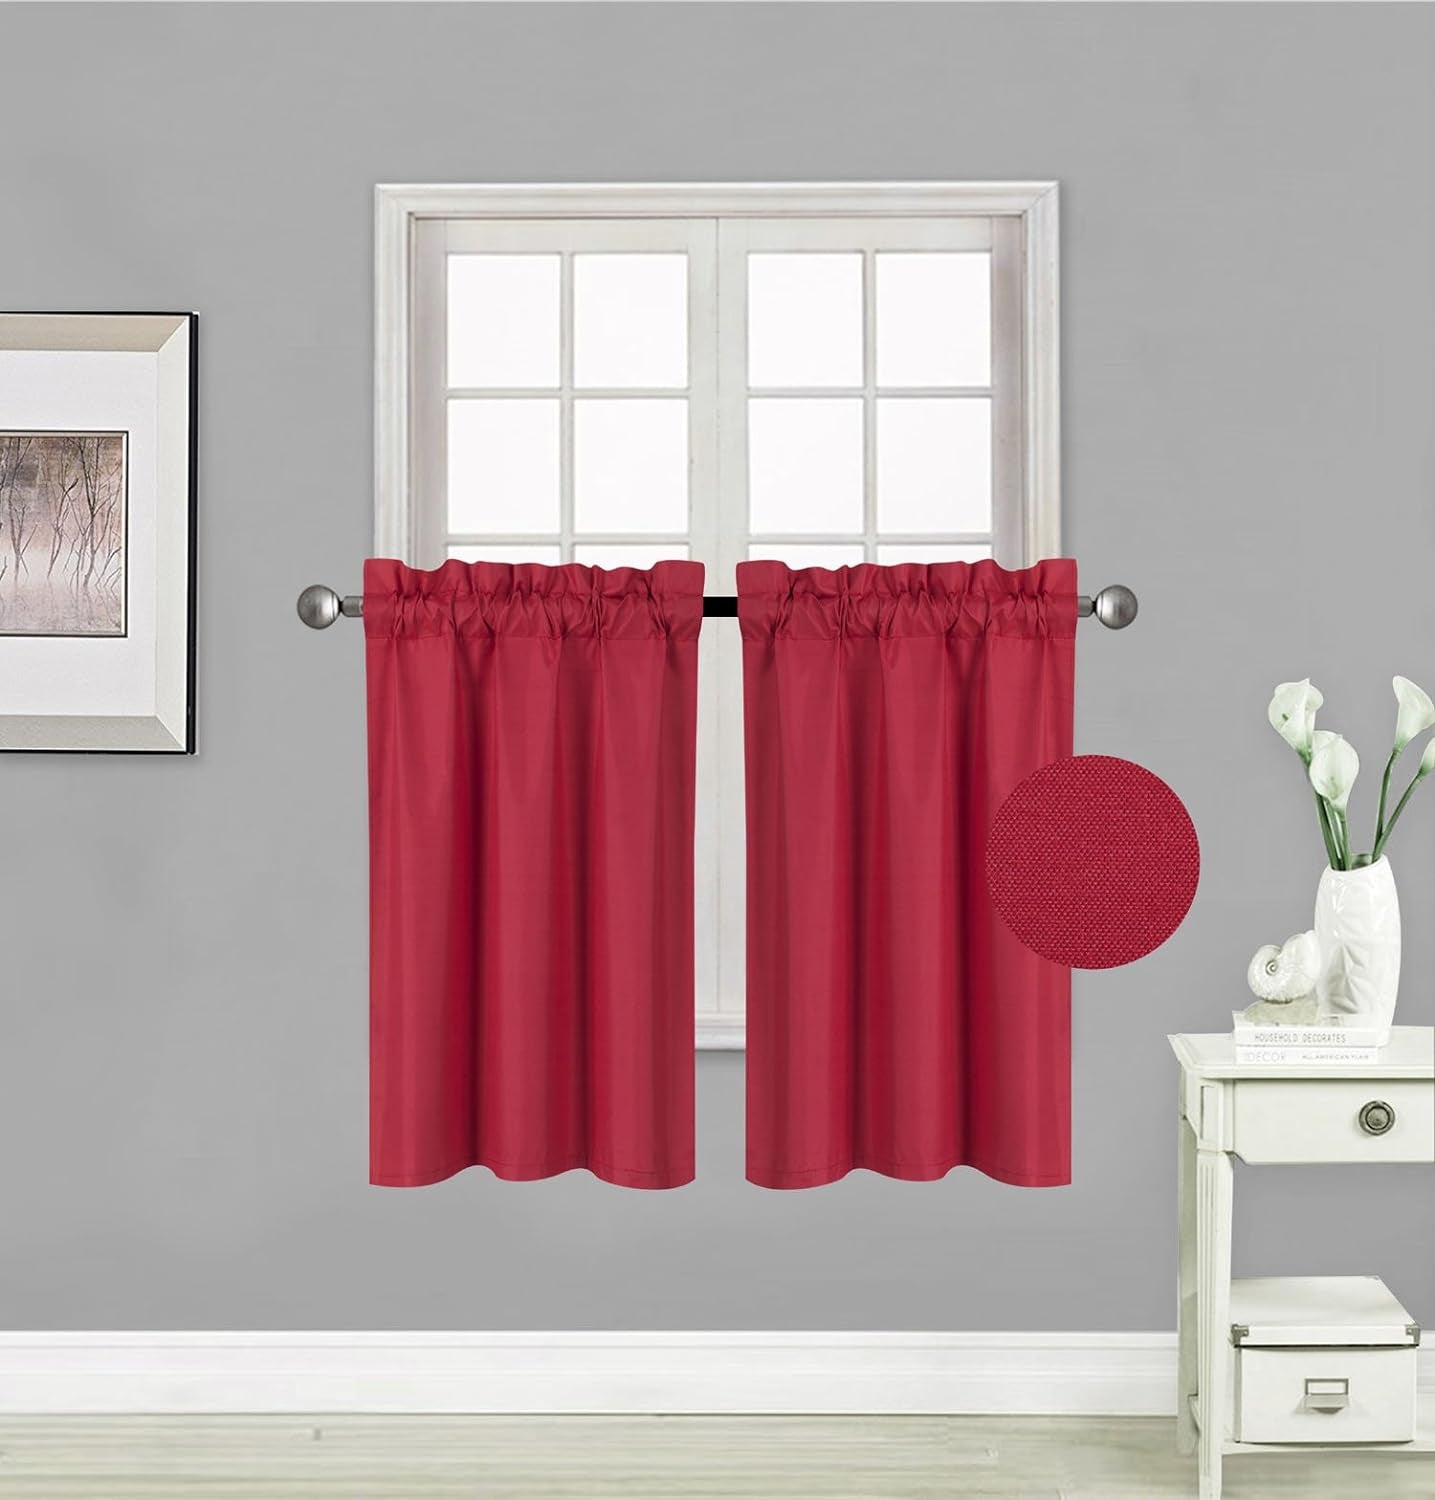 Elegant Home 2 Short Panels Tiers Small Window Treatment Curtain Blackout 28" W X 36" L Each for Kitchen Bathroom # R5  Elegant Home Decor Red  